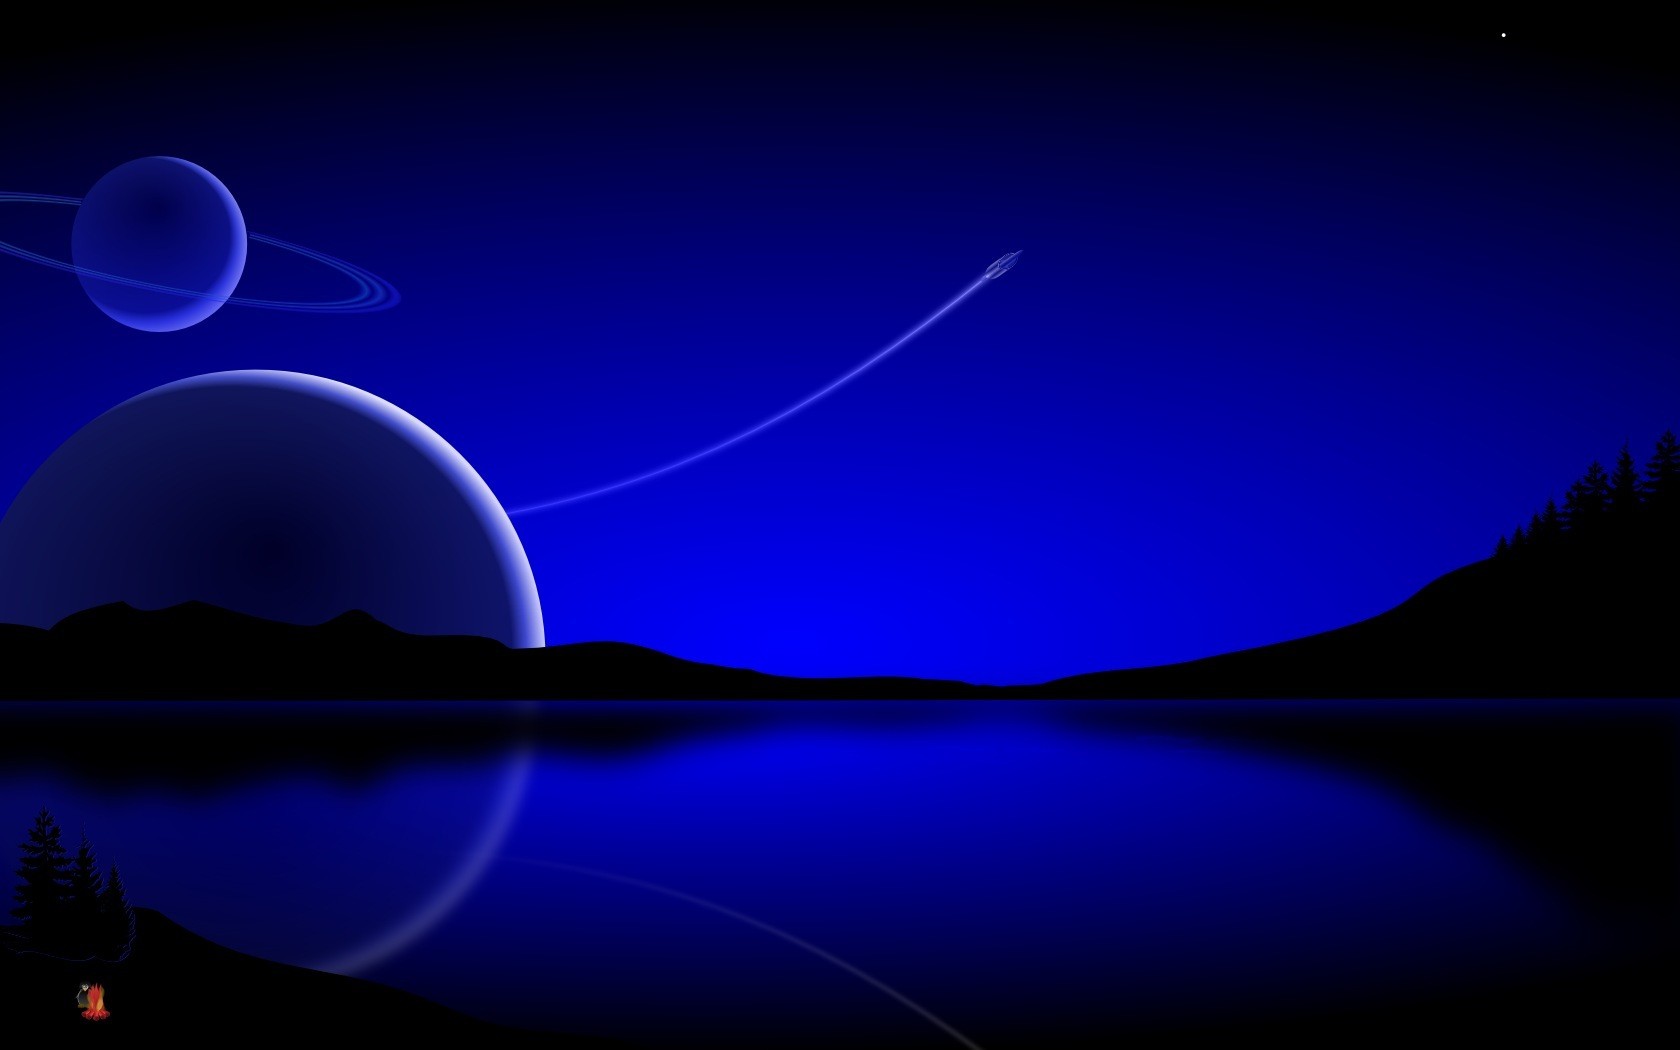 water, Stars, Planets, Rings, Spaceships, Vehicles, Evergreen, Reflections, Blue, Skies Wallpaper